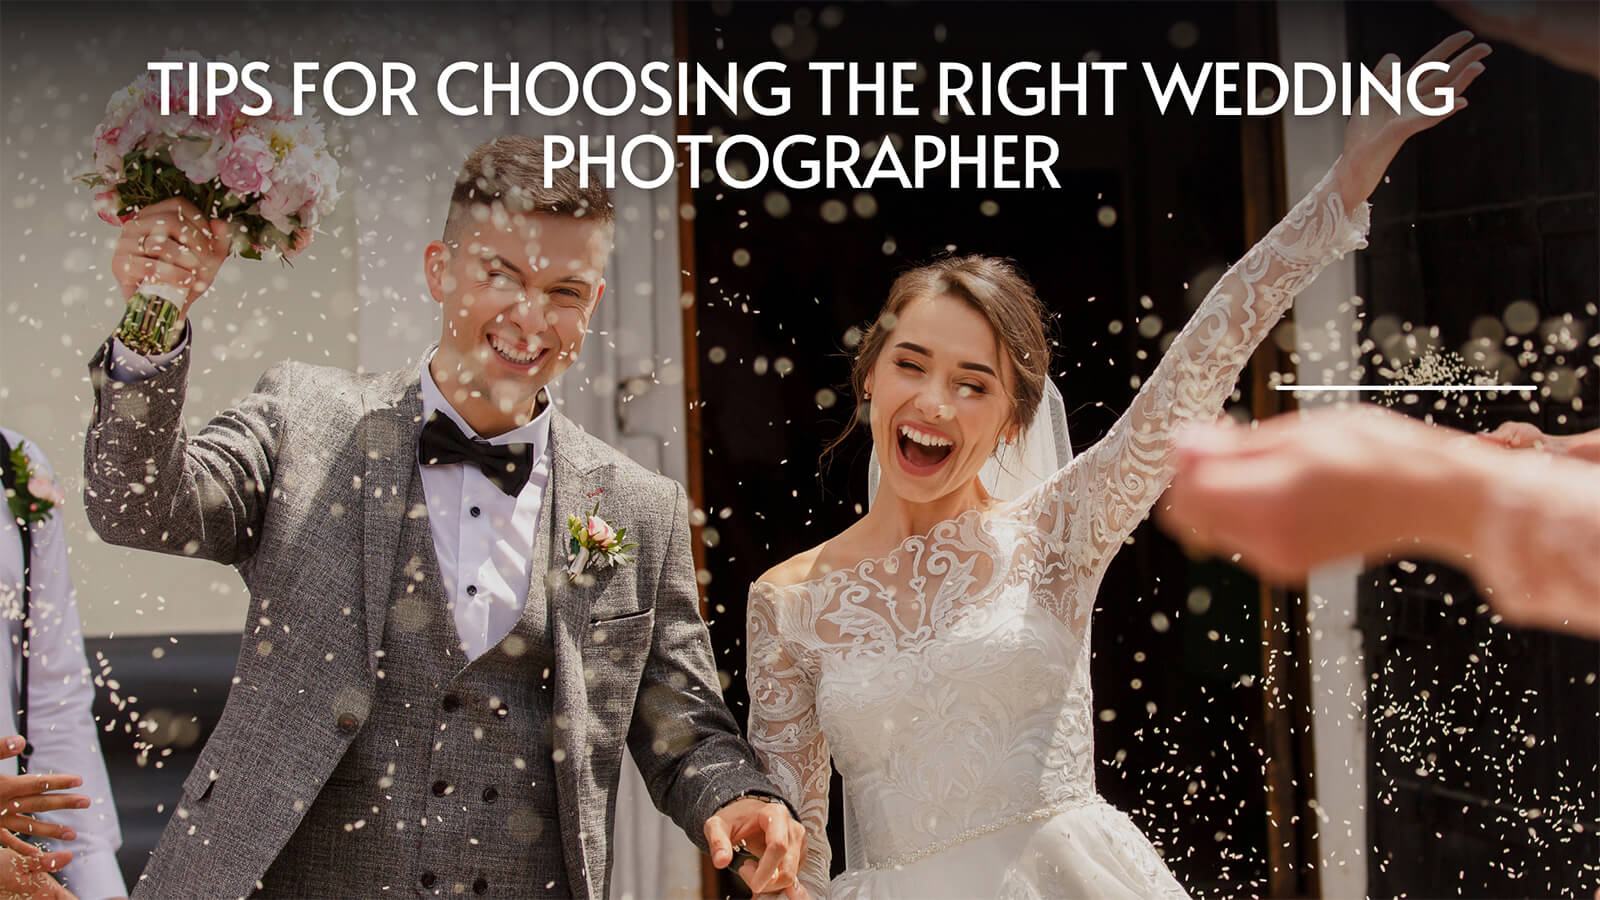 You are currently viewing 8 New Tips for Choosing the Right Wedding Photographer in Toronto